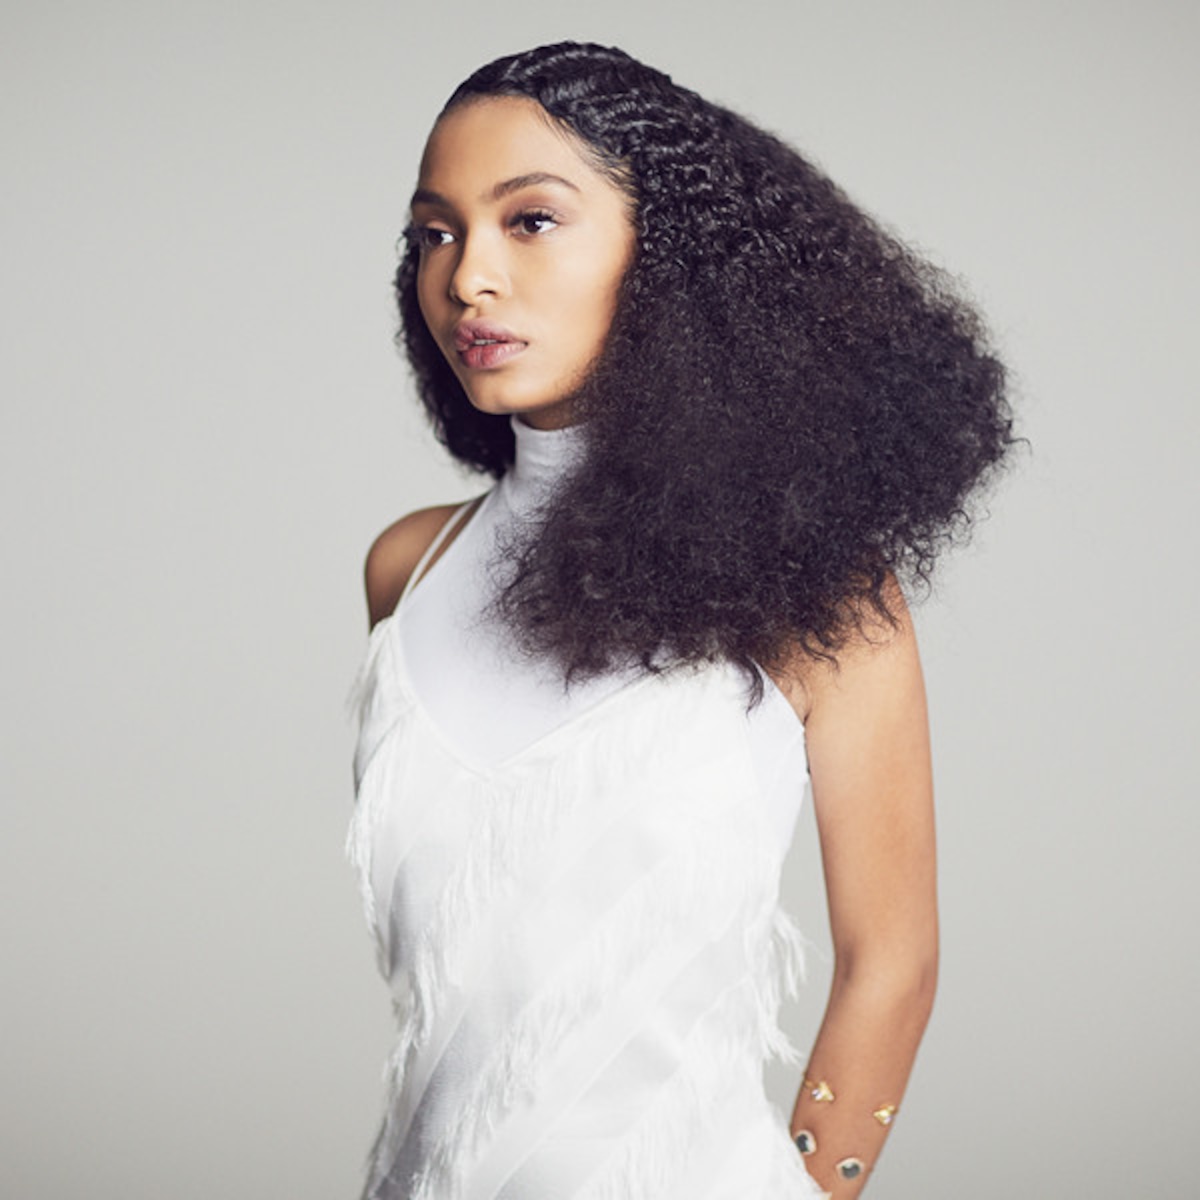 What It's Like to Wear Your Natural Hair Like Yara Shahidi - E! Online